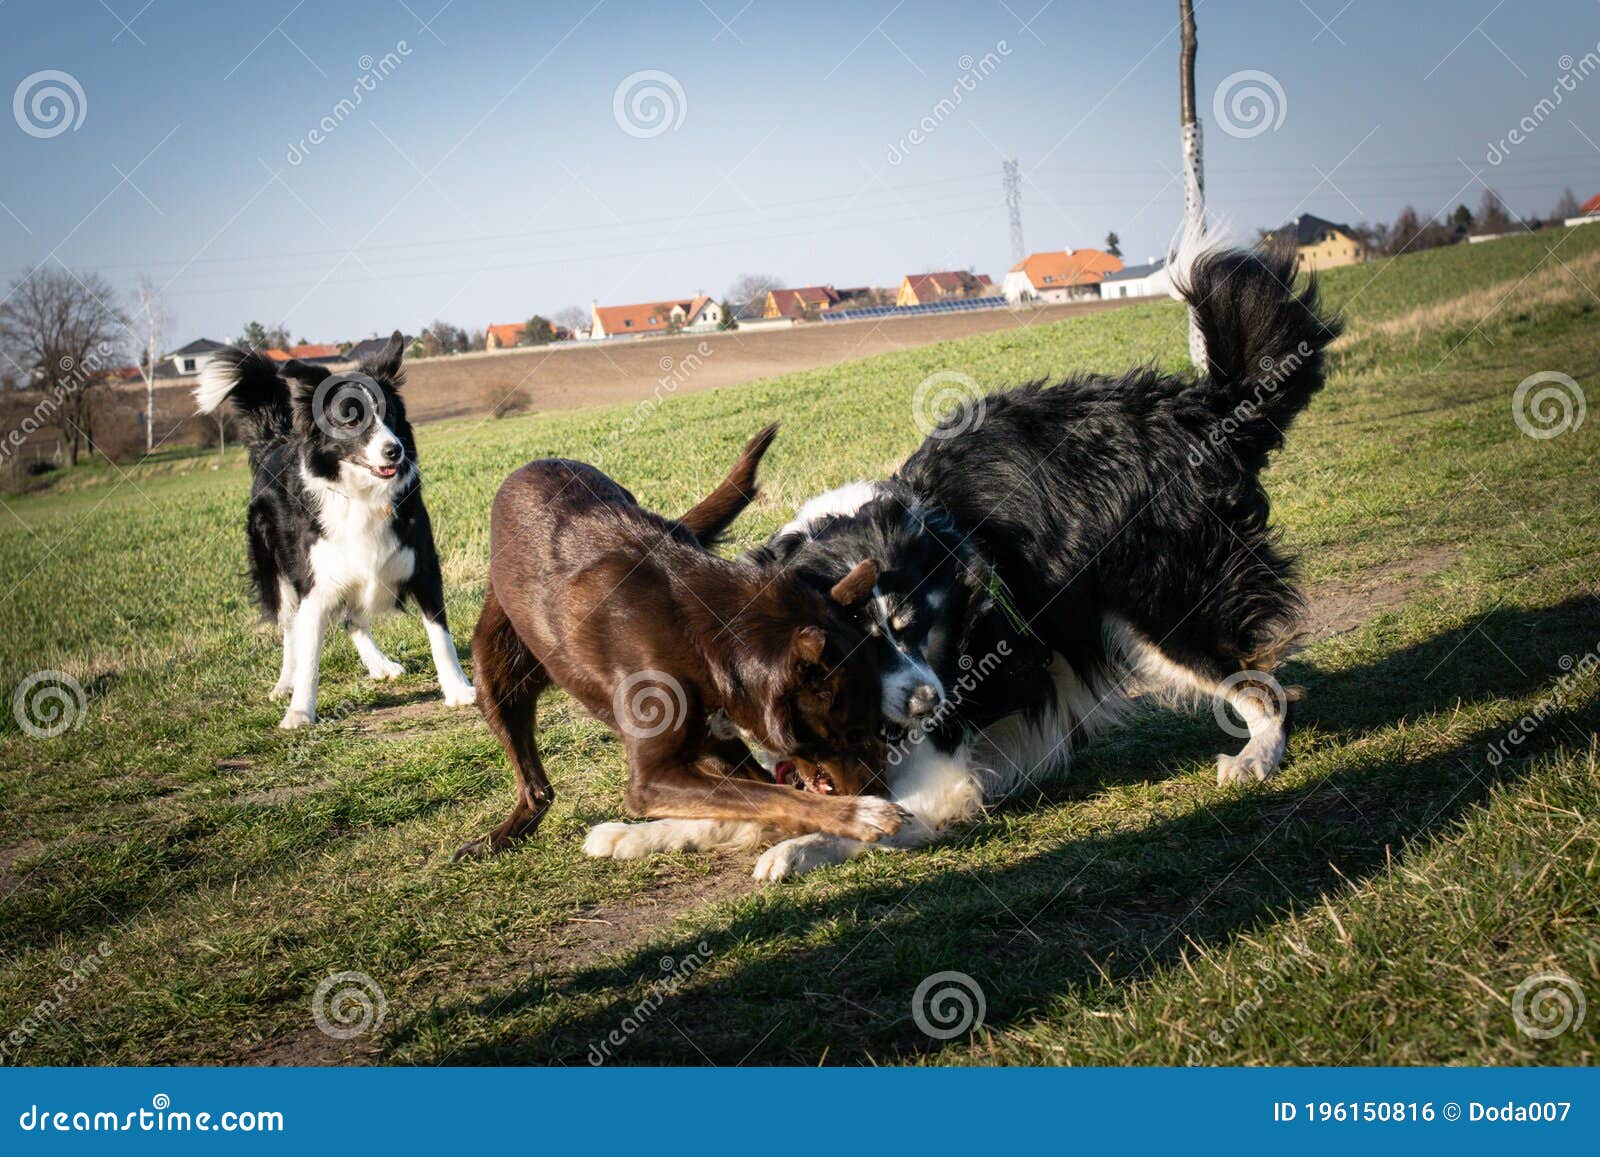 border collies are plying together